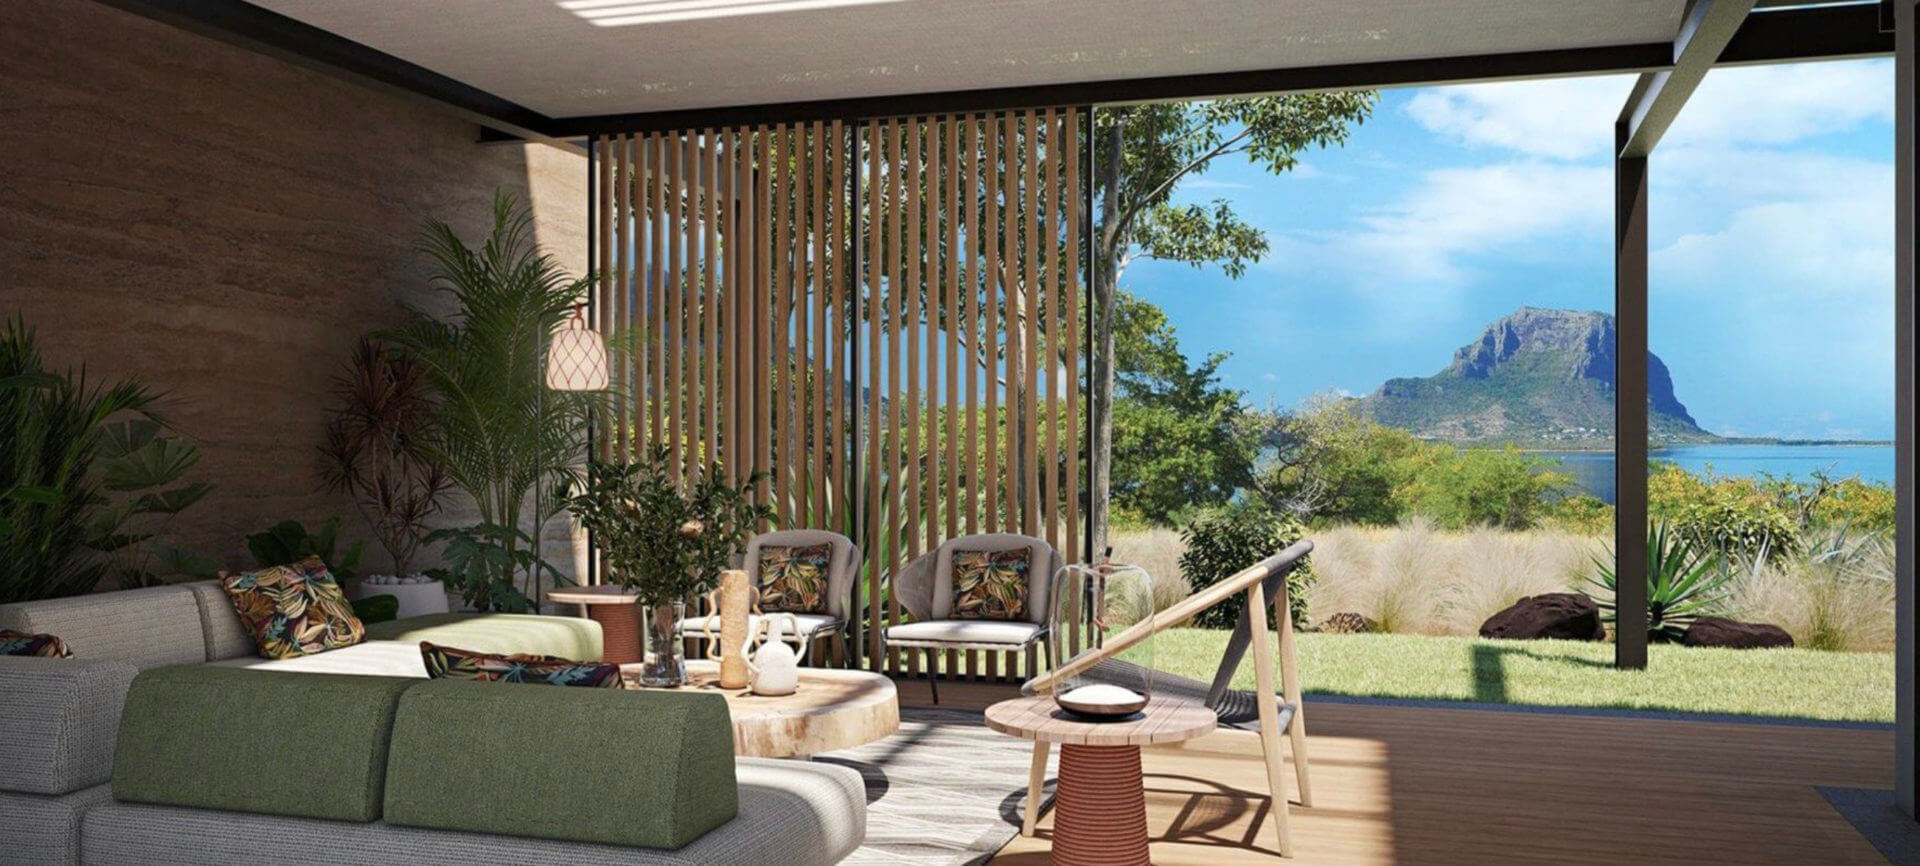 New Mauritian Residential development ups the lifestyle ante